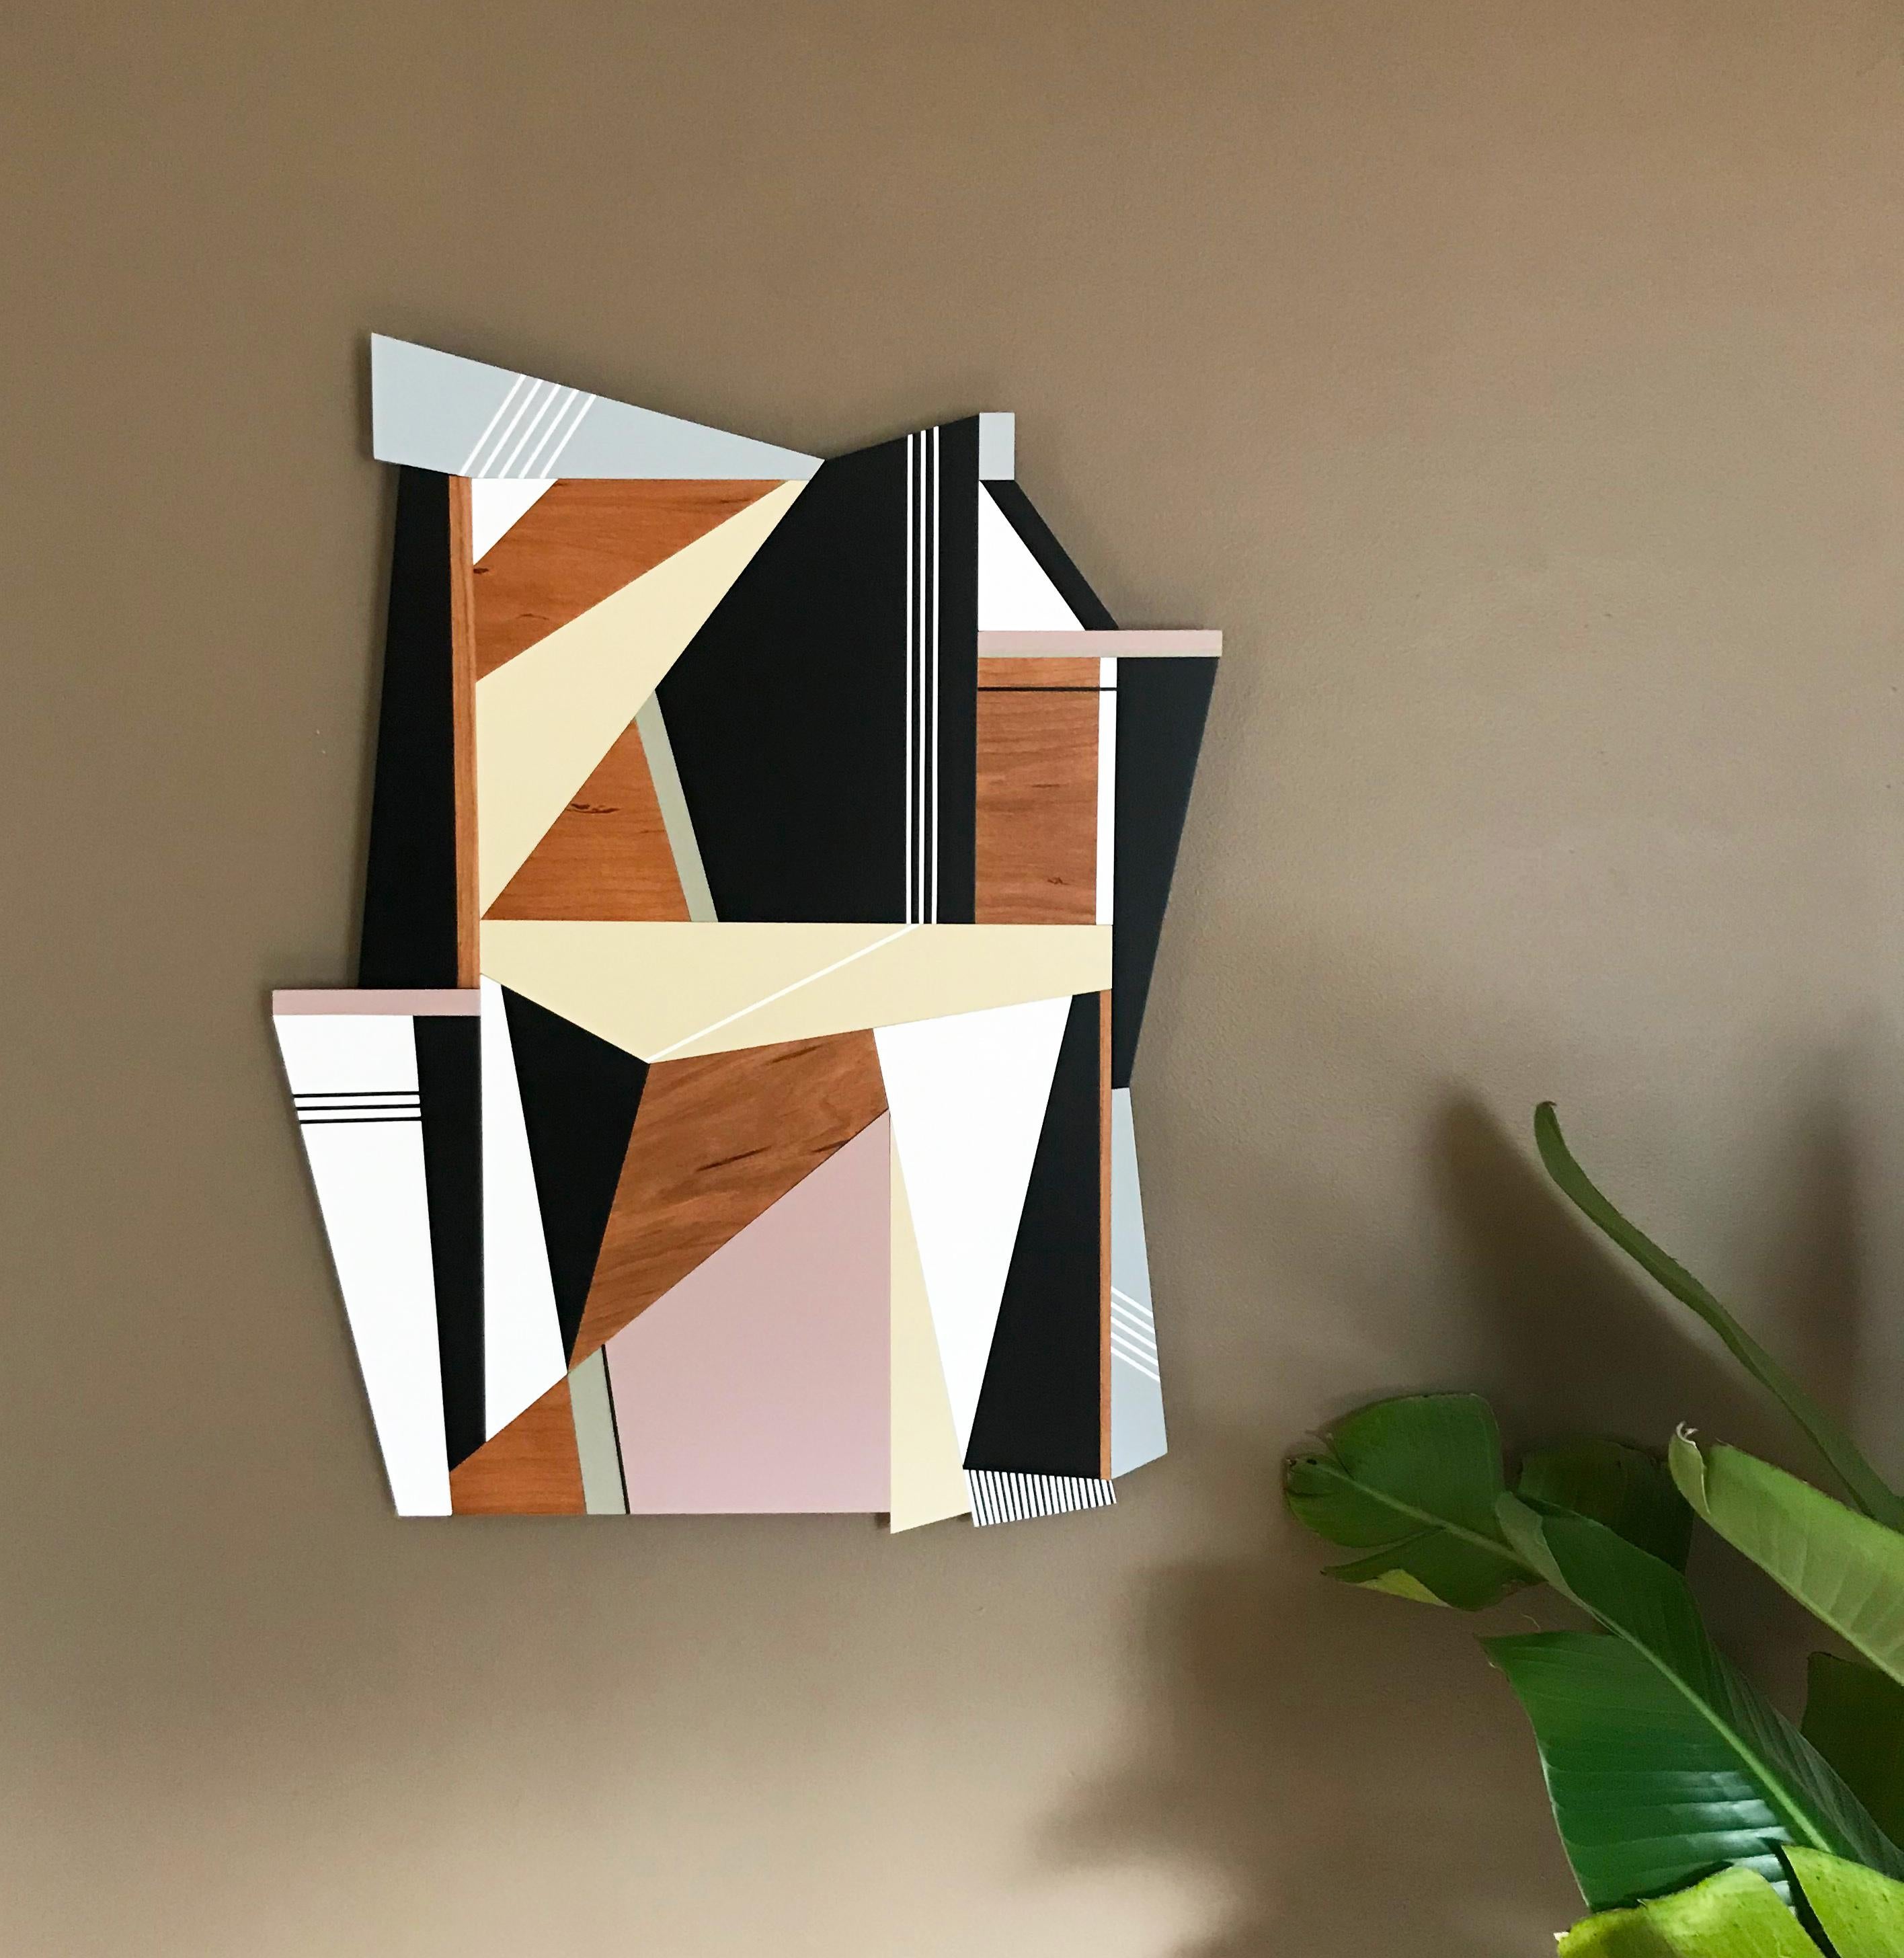 This Series focuses on the combination of wood and sleek modern painted panels. I feel they are retro-futurist. The juxtaposition of the organic and warm wood grain with jutting, sharp, angular lines creates something similar to what the Mid-century